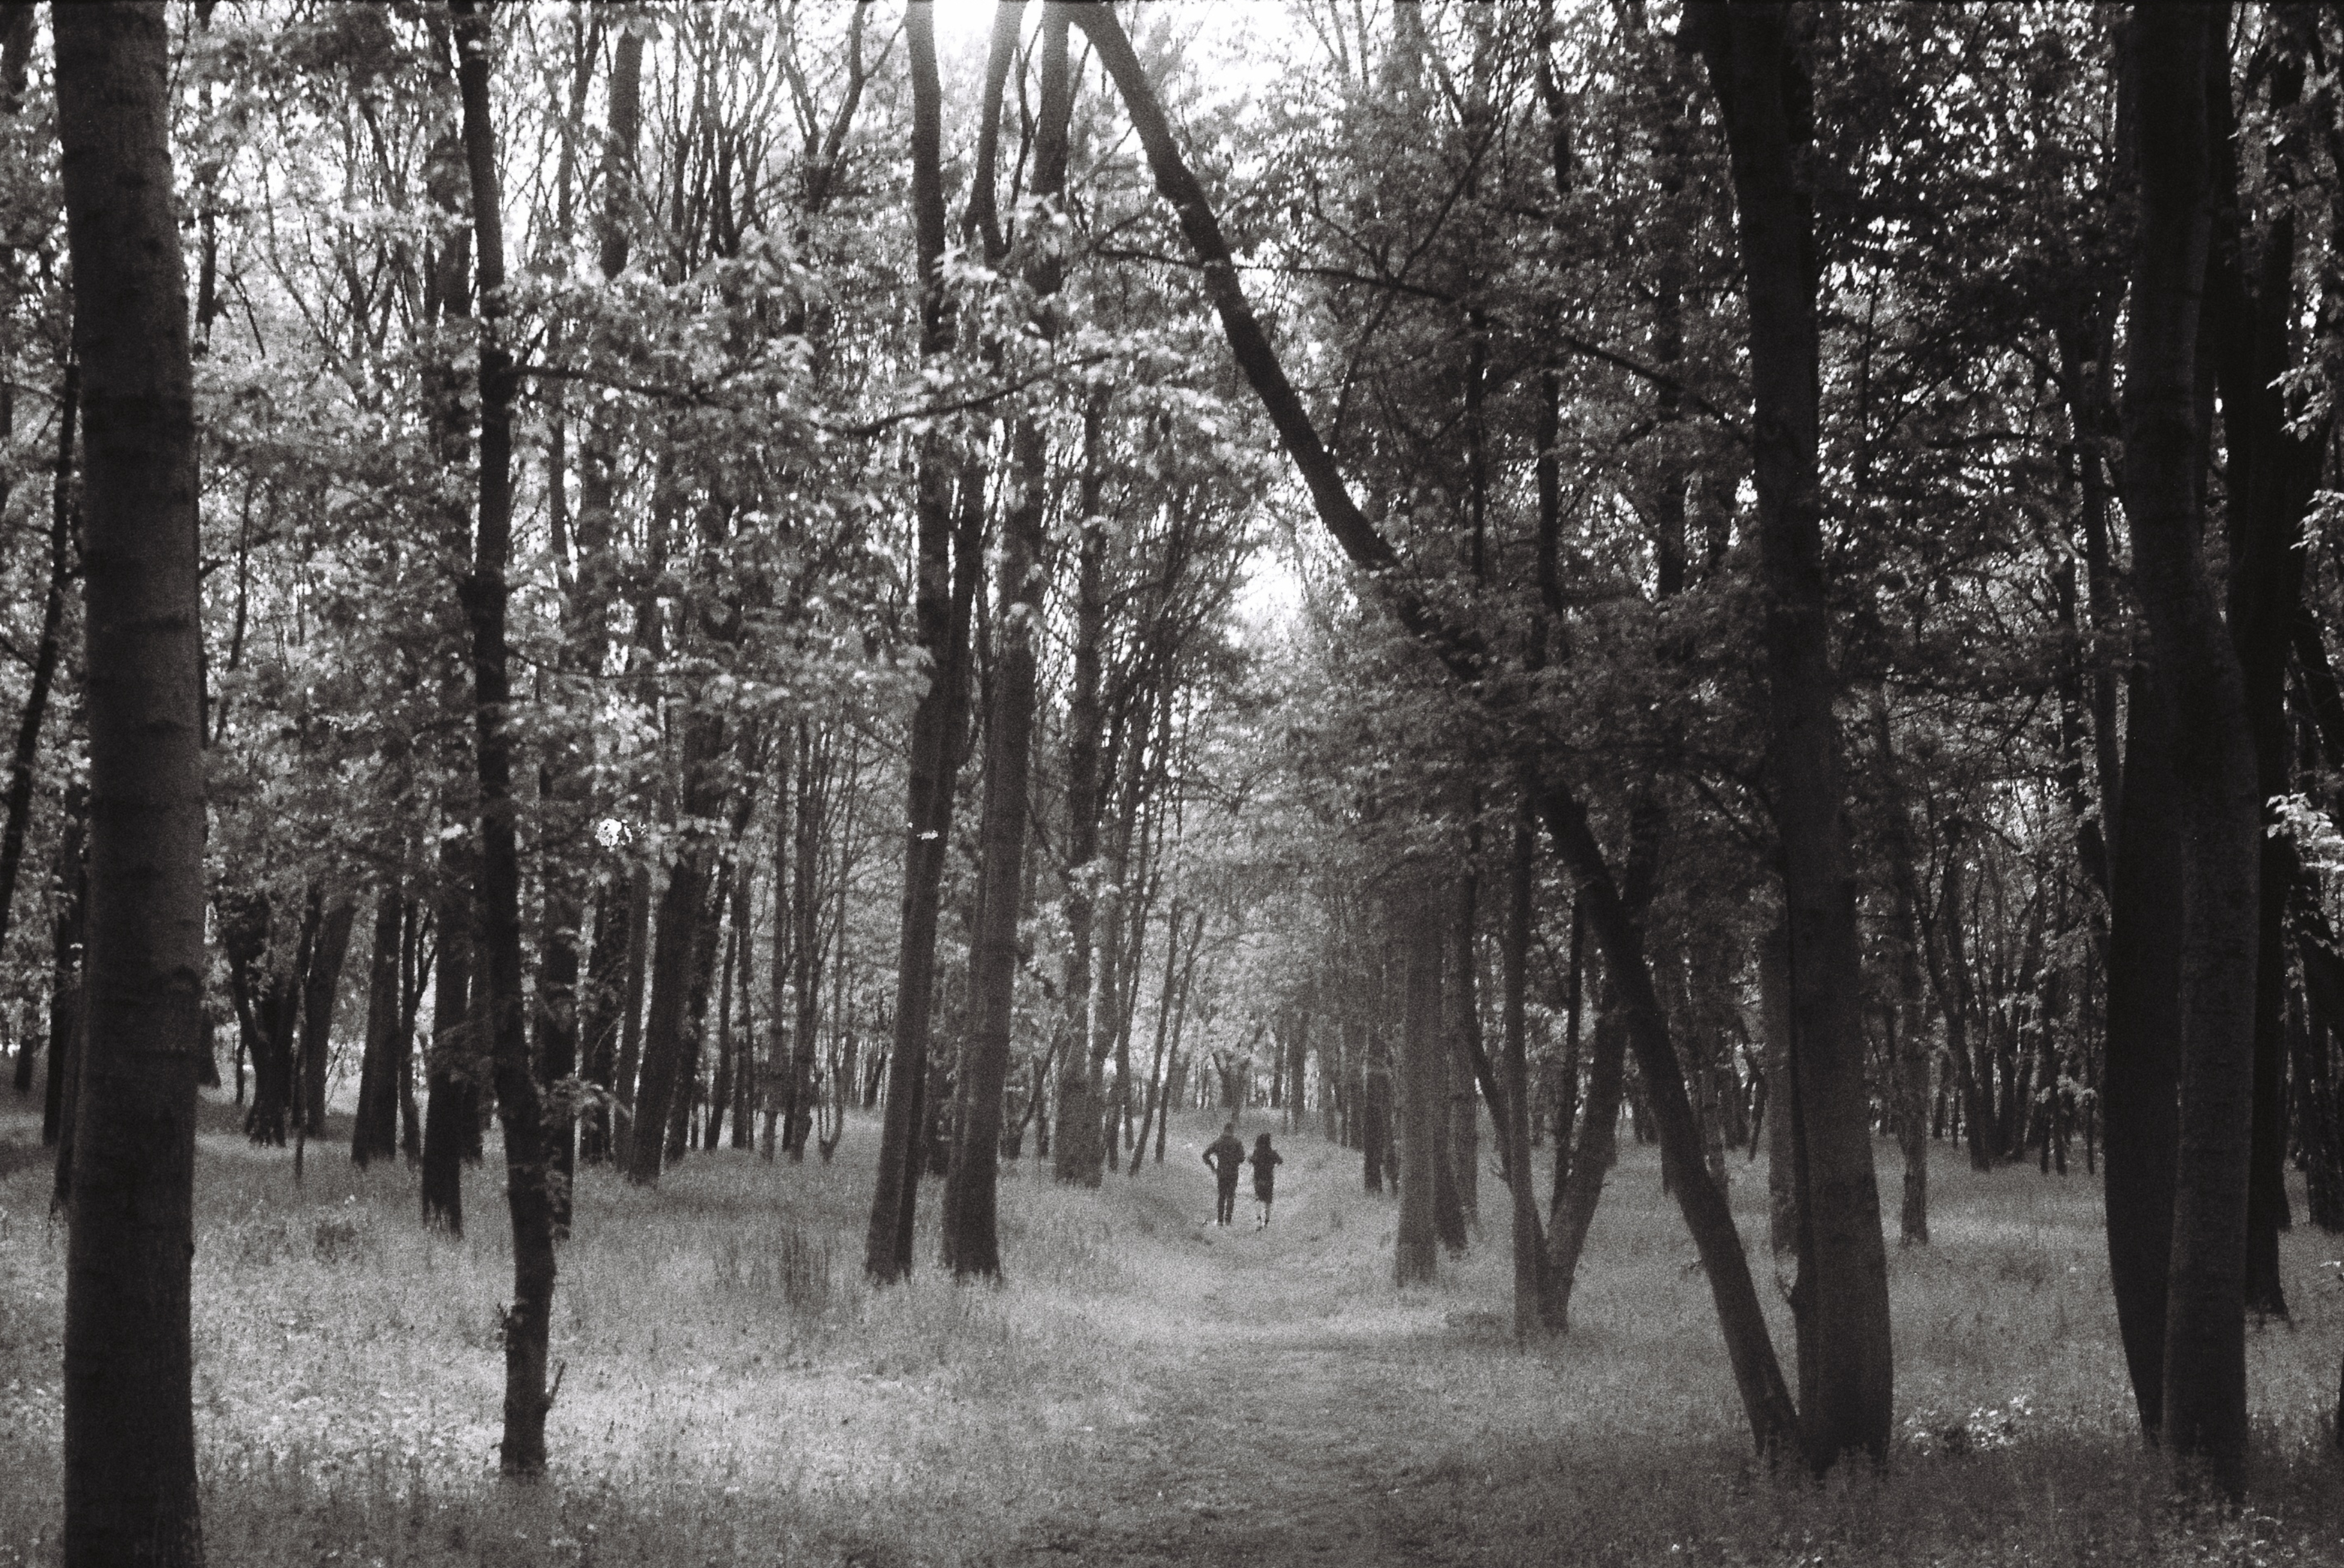 Runners in a forest